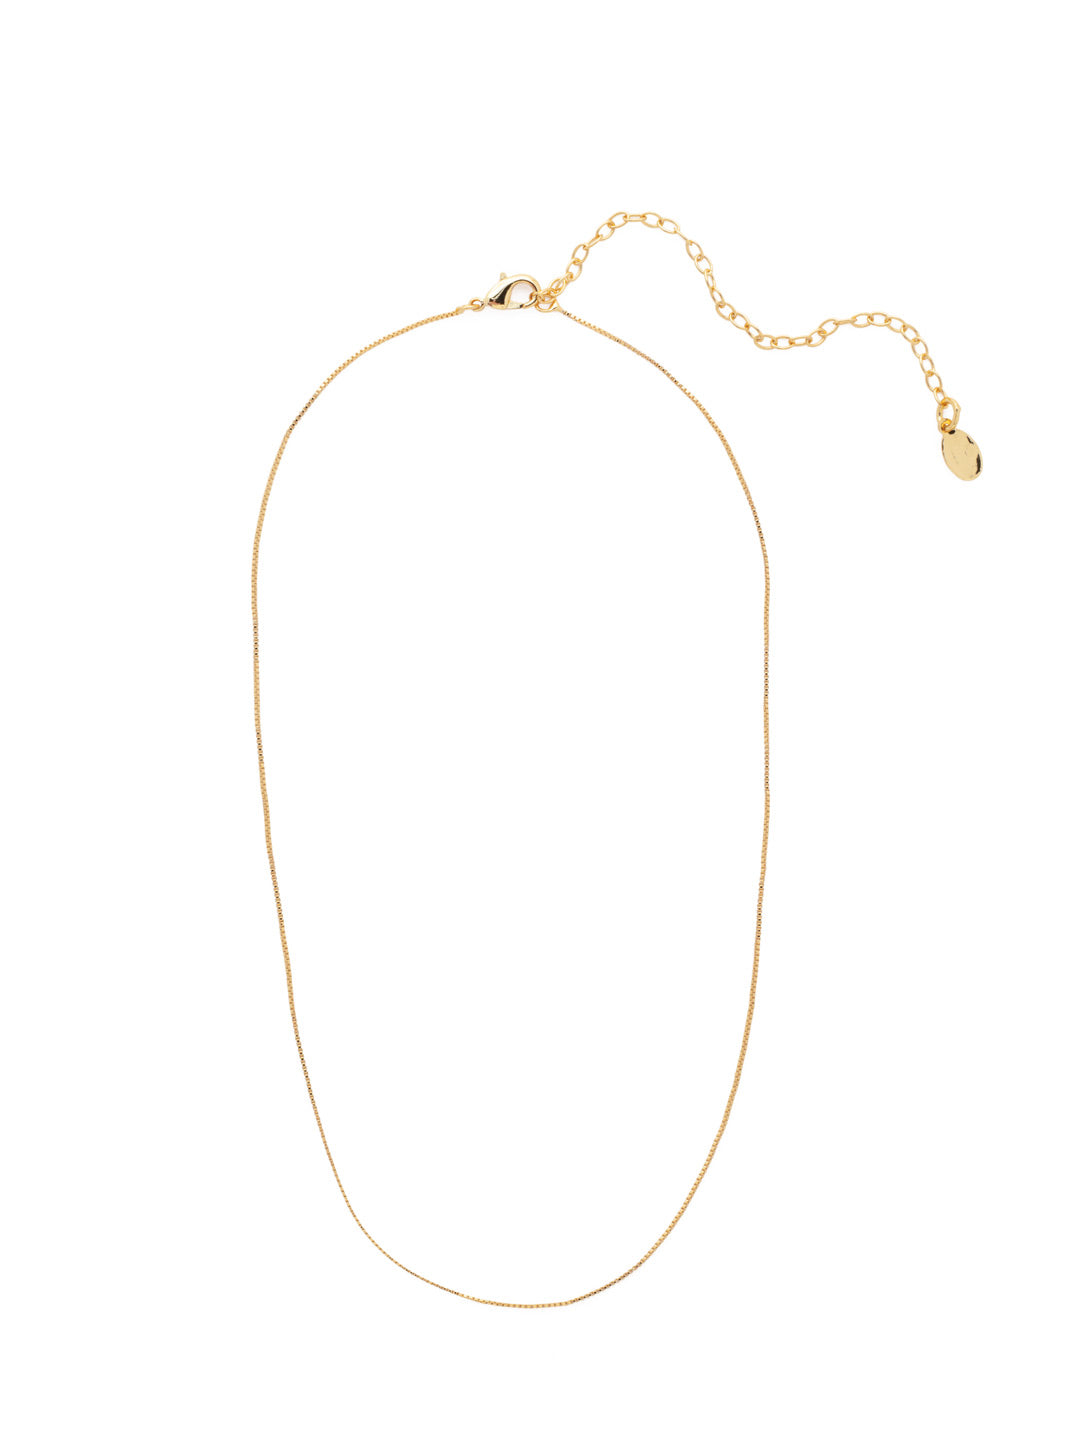 Millie Choker Necklace - 4NEV10BGMTL - <p>The Millie Choker Necklace is the perfect delicate chain that goes with everything. From Sorrelli's Bare Metallic collection in our Bright Gold-tone finish.</p>